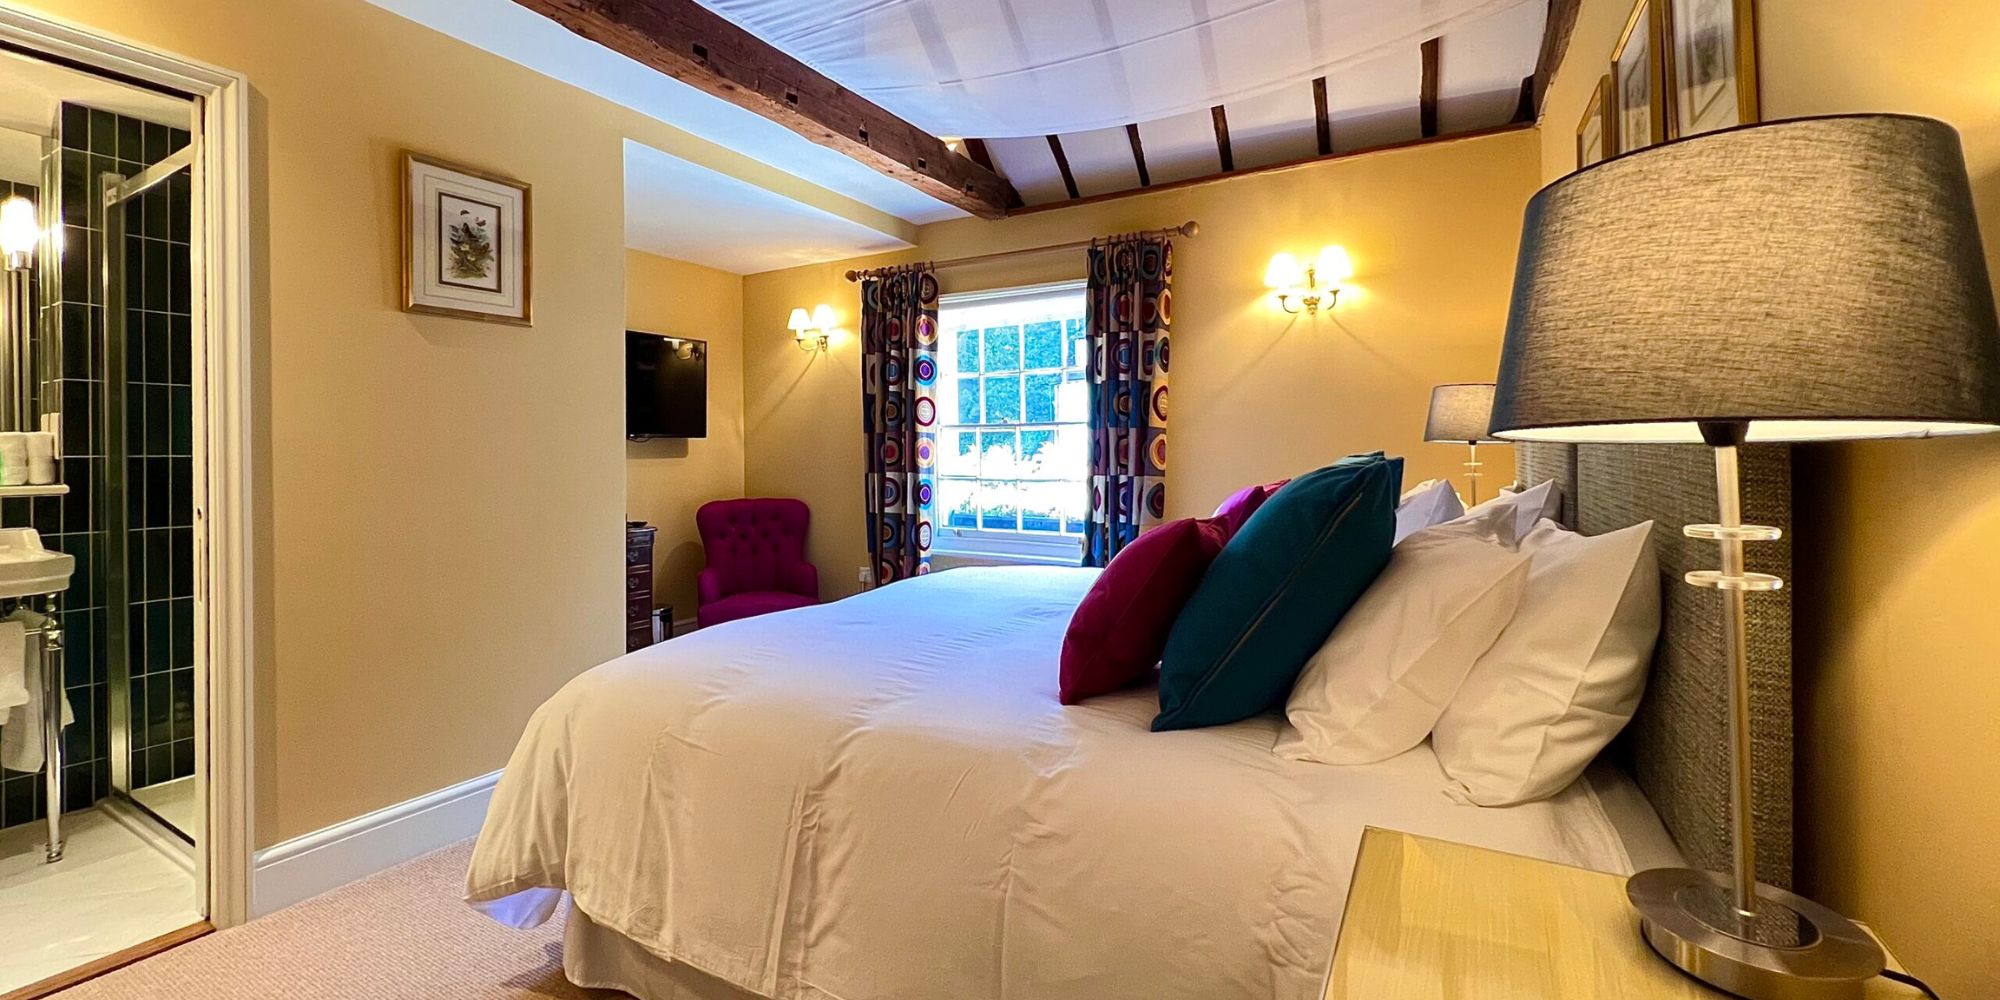 Boutique hotel surrey hills - relax in our luxurious bedrooms